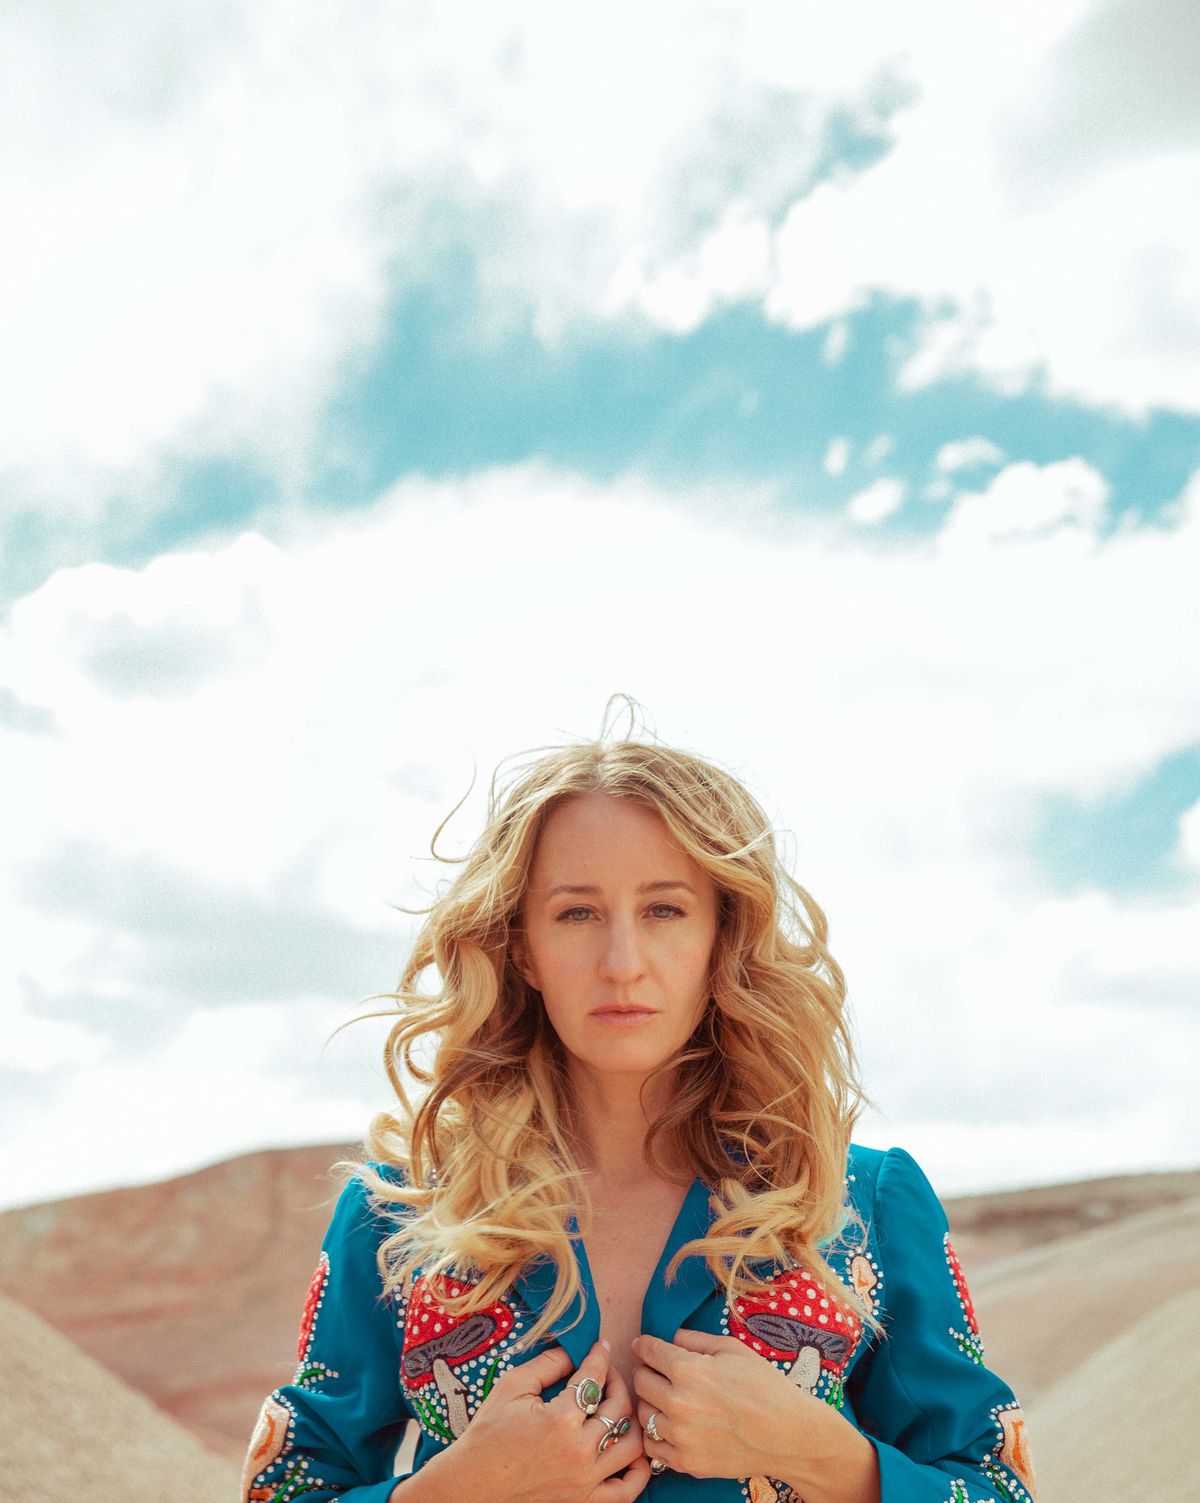 margo price wears a suit with tassles on the sleeves and mushroom embroidery